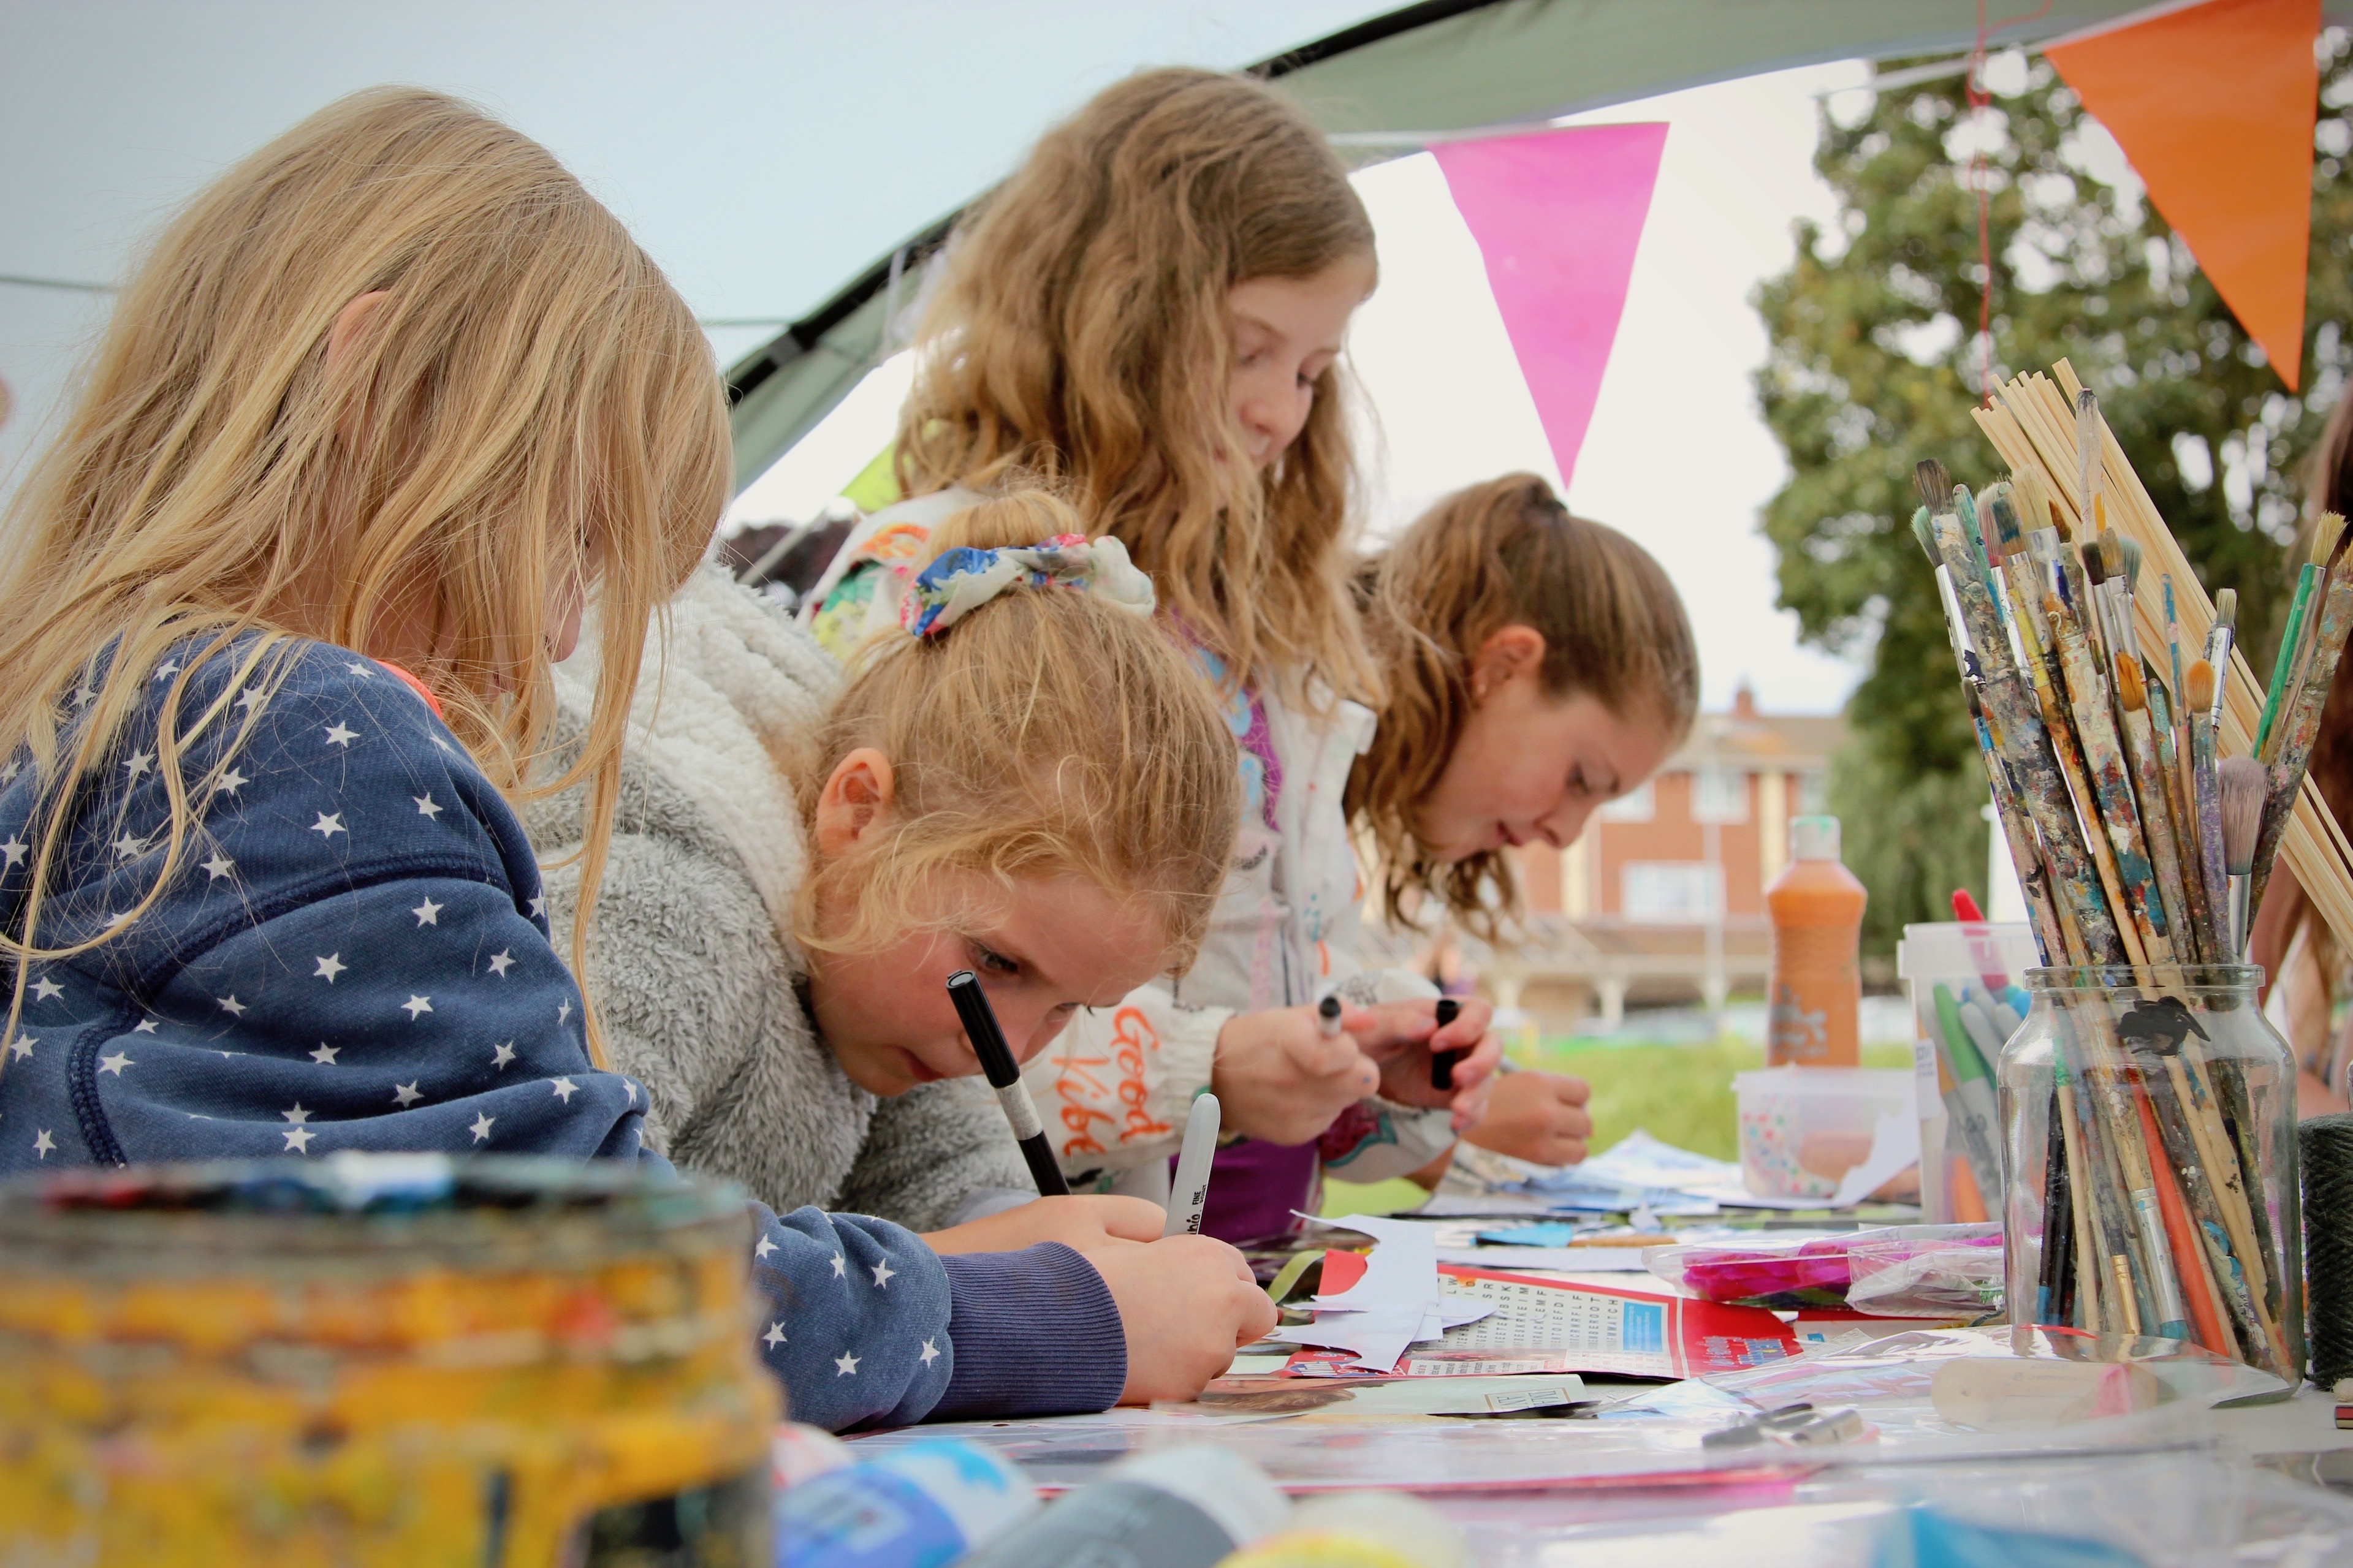 Image of 4 girls doing arts & crafts in an outdoor tent with bunting hanging in the background